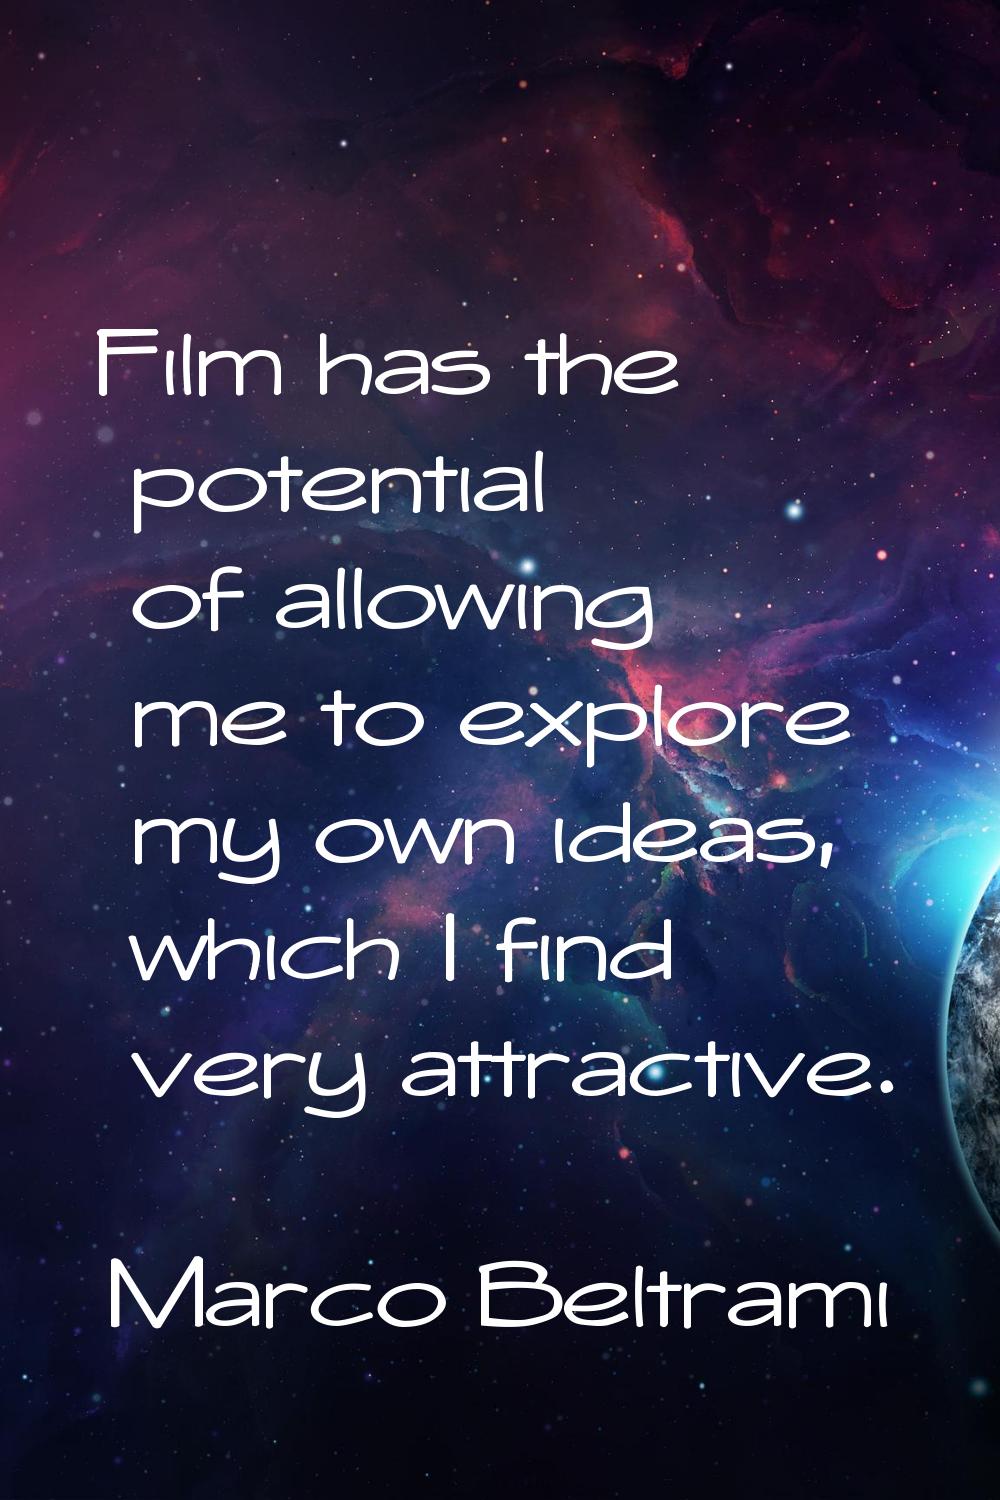 Film has the potential of allowing me to explore my own ideas, which I find very attractive.